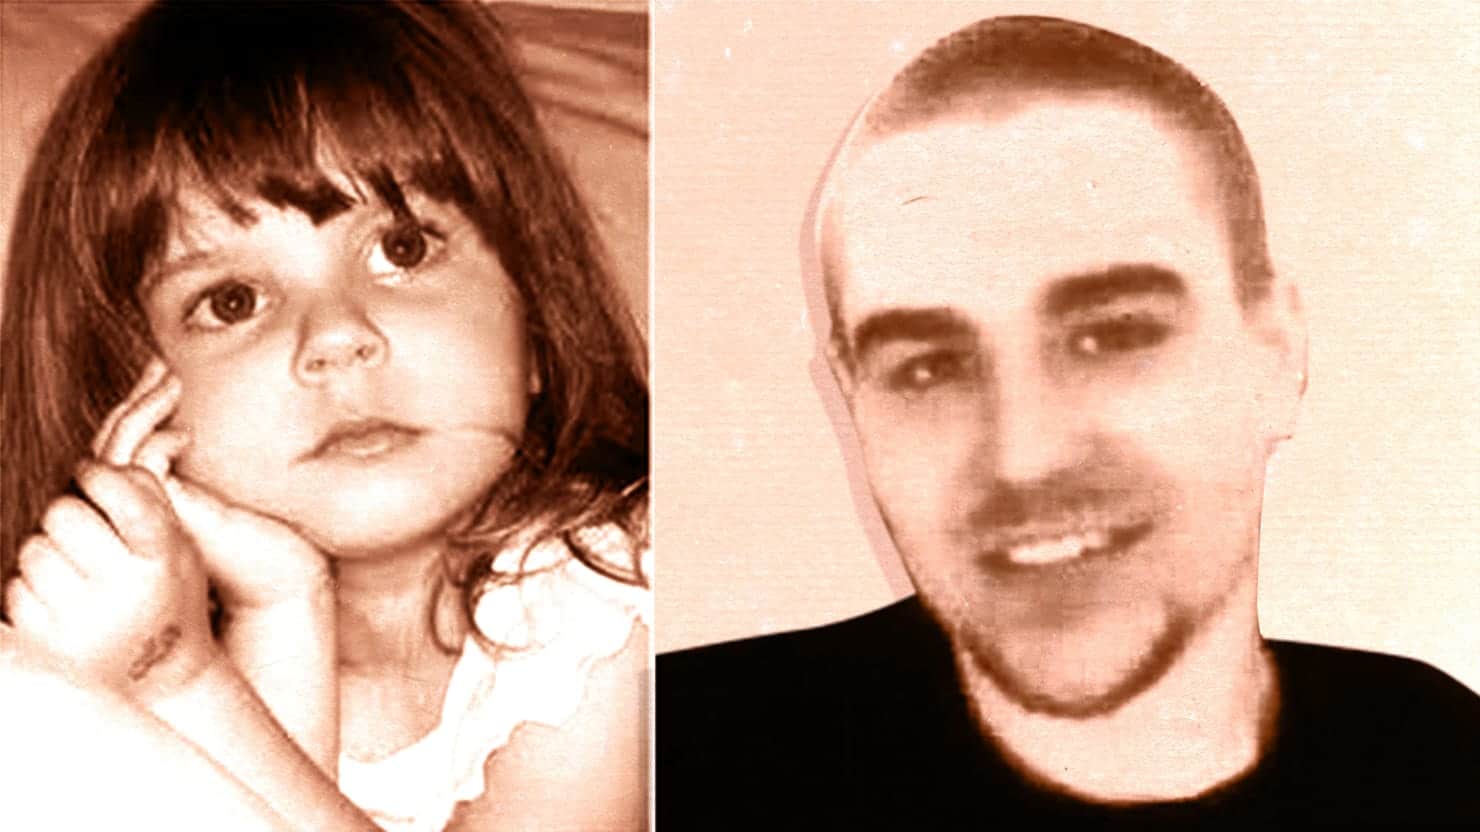 Casey Anthony Murder Trial: Who Is Caylee Anthony's Father?